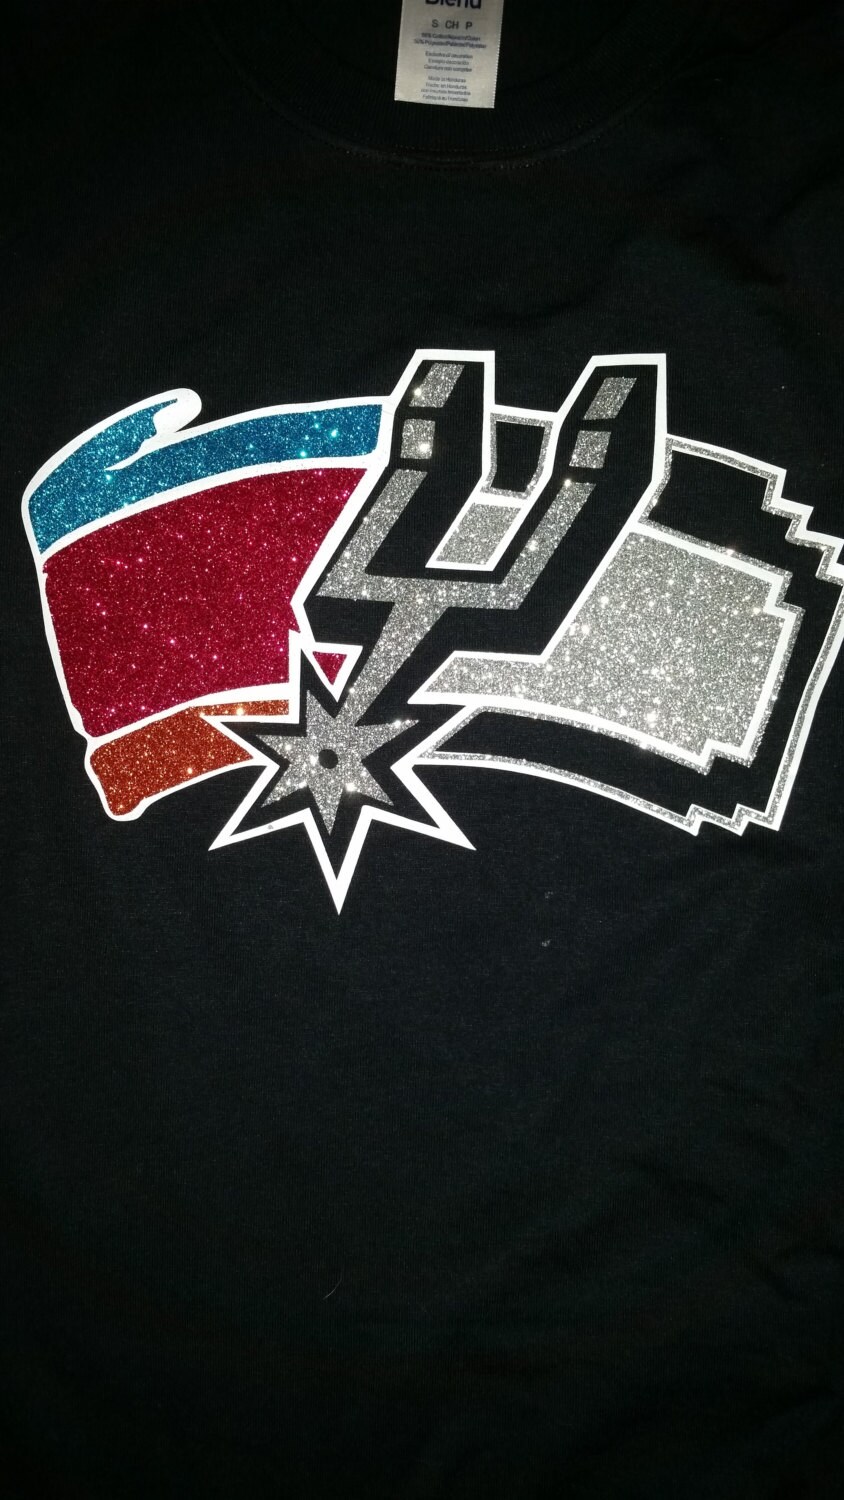 San Antonio Spurs Combo logo by AsilBoutique on Etsy